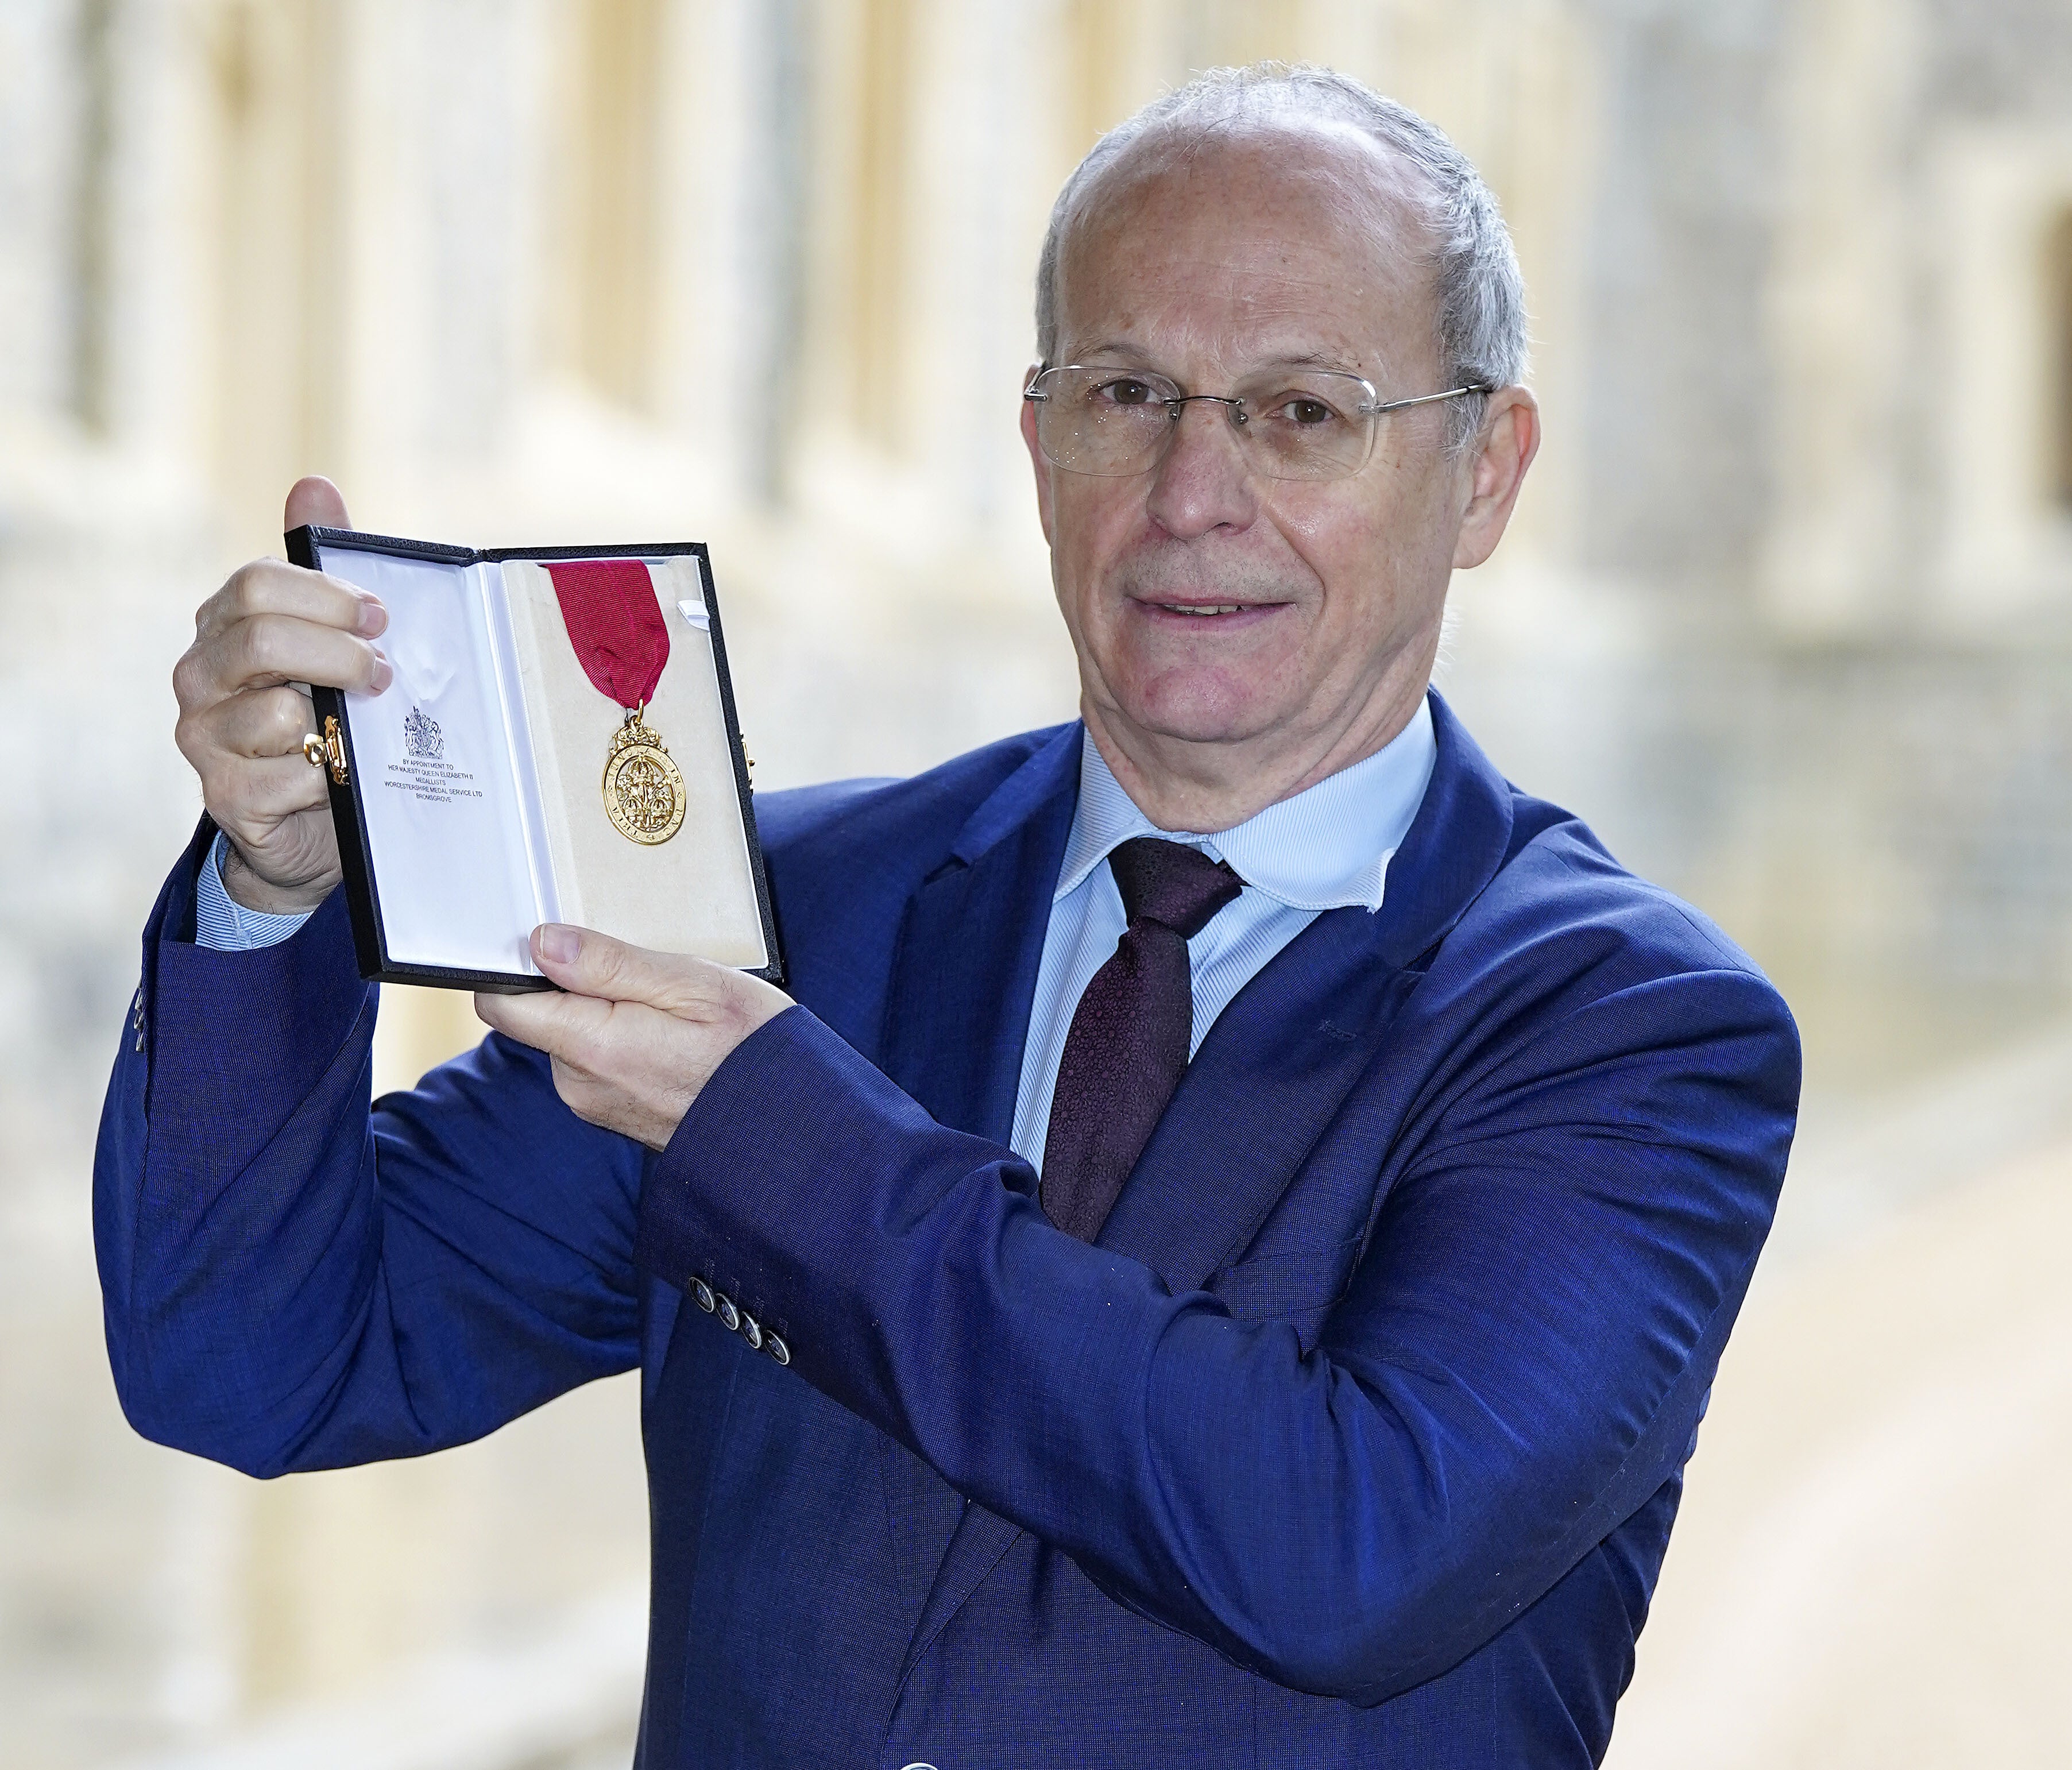 Peter Betts was made a Companion Order Of The Bath by the Duke of Cambridge at Windsor Castle (Steve Parsons/PA)